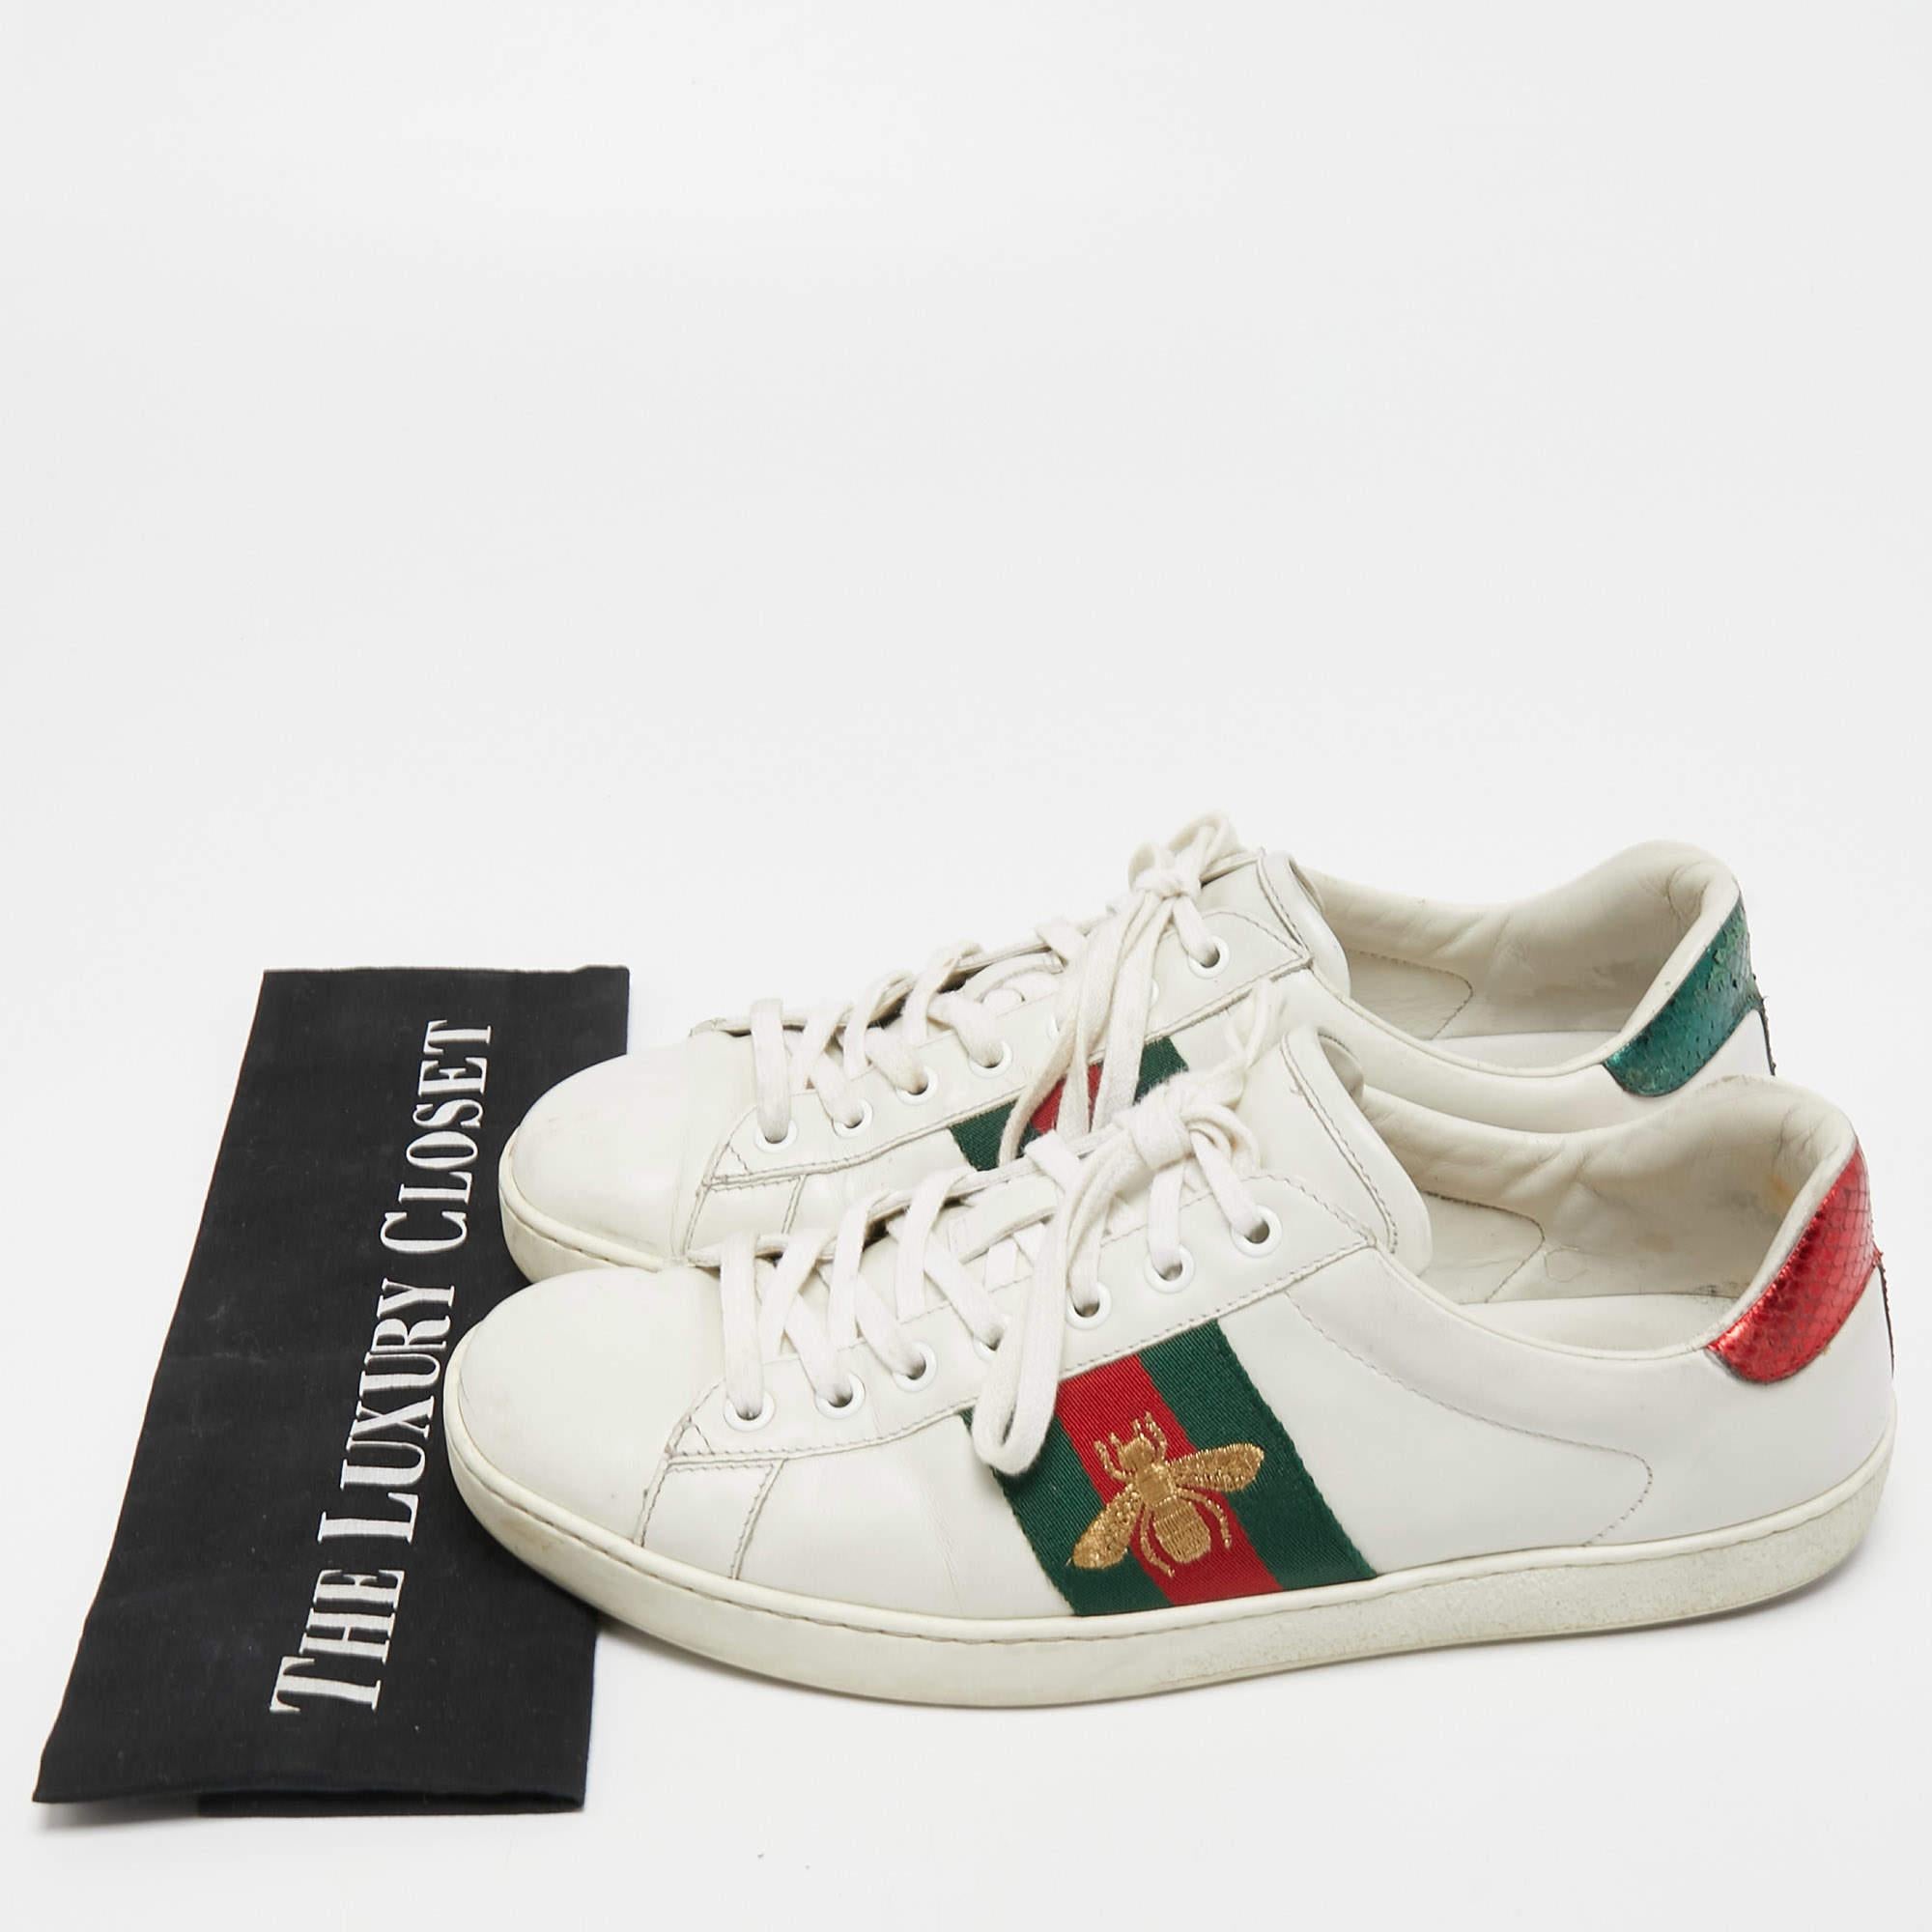 Gucci White Leather Embroidered Bee Ace Sneakers Size 42.5 5